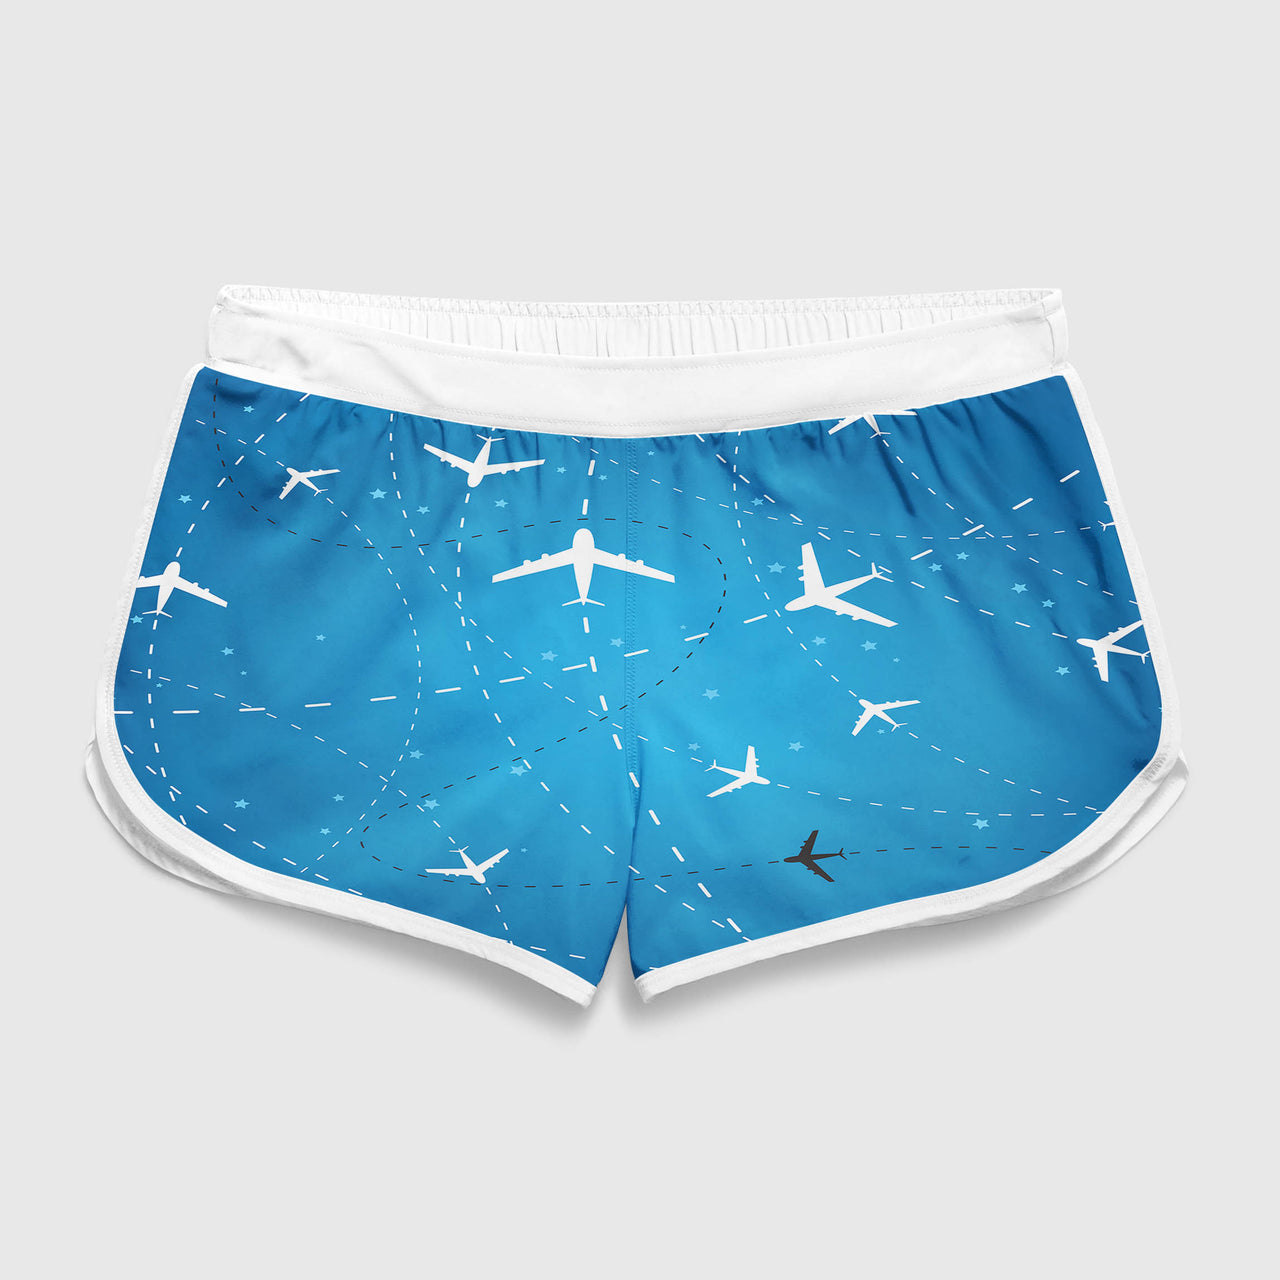 Travelling with Aircraft (Blue) Designed Women Beach Style Shorts